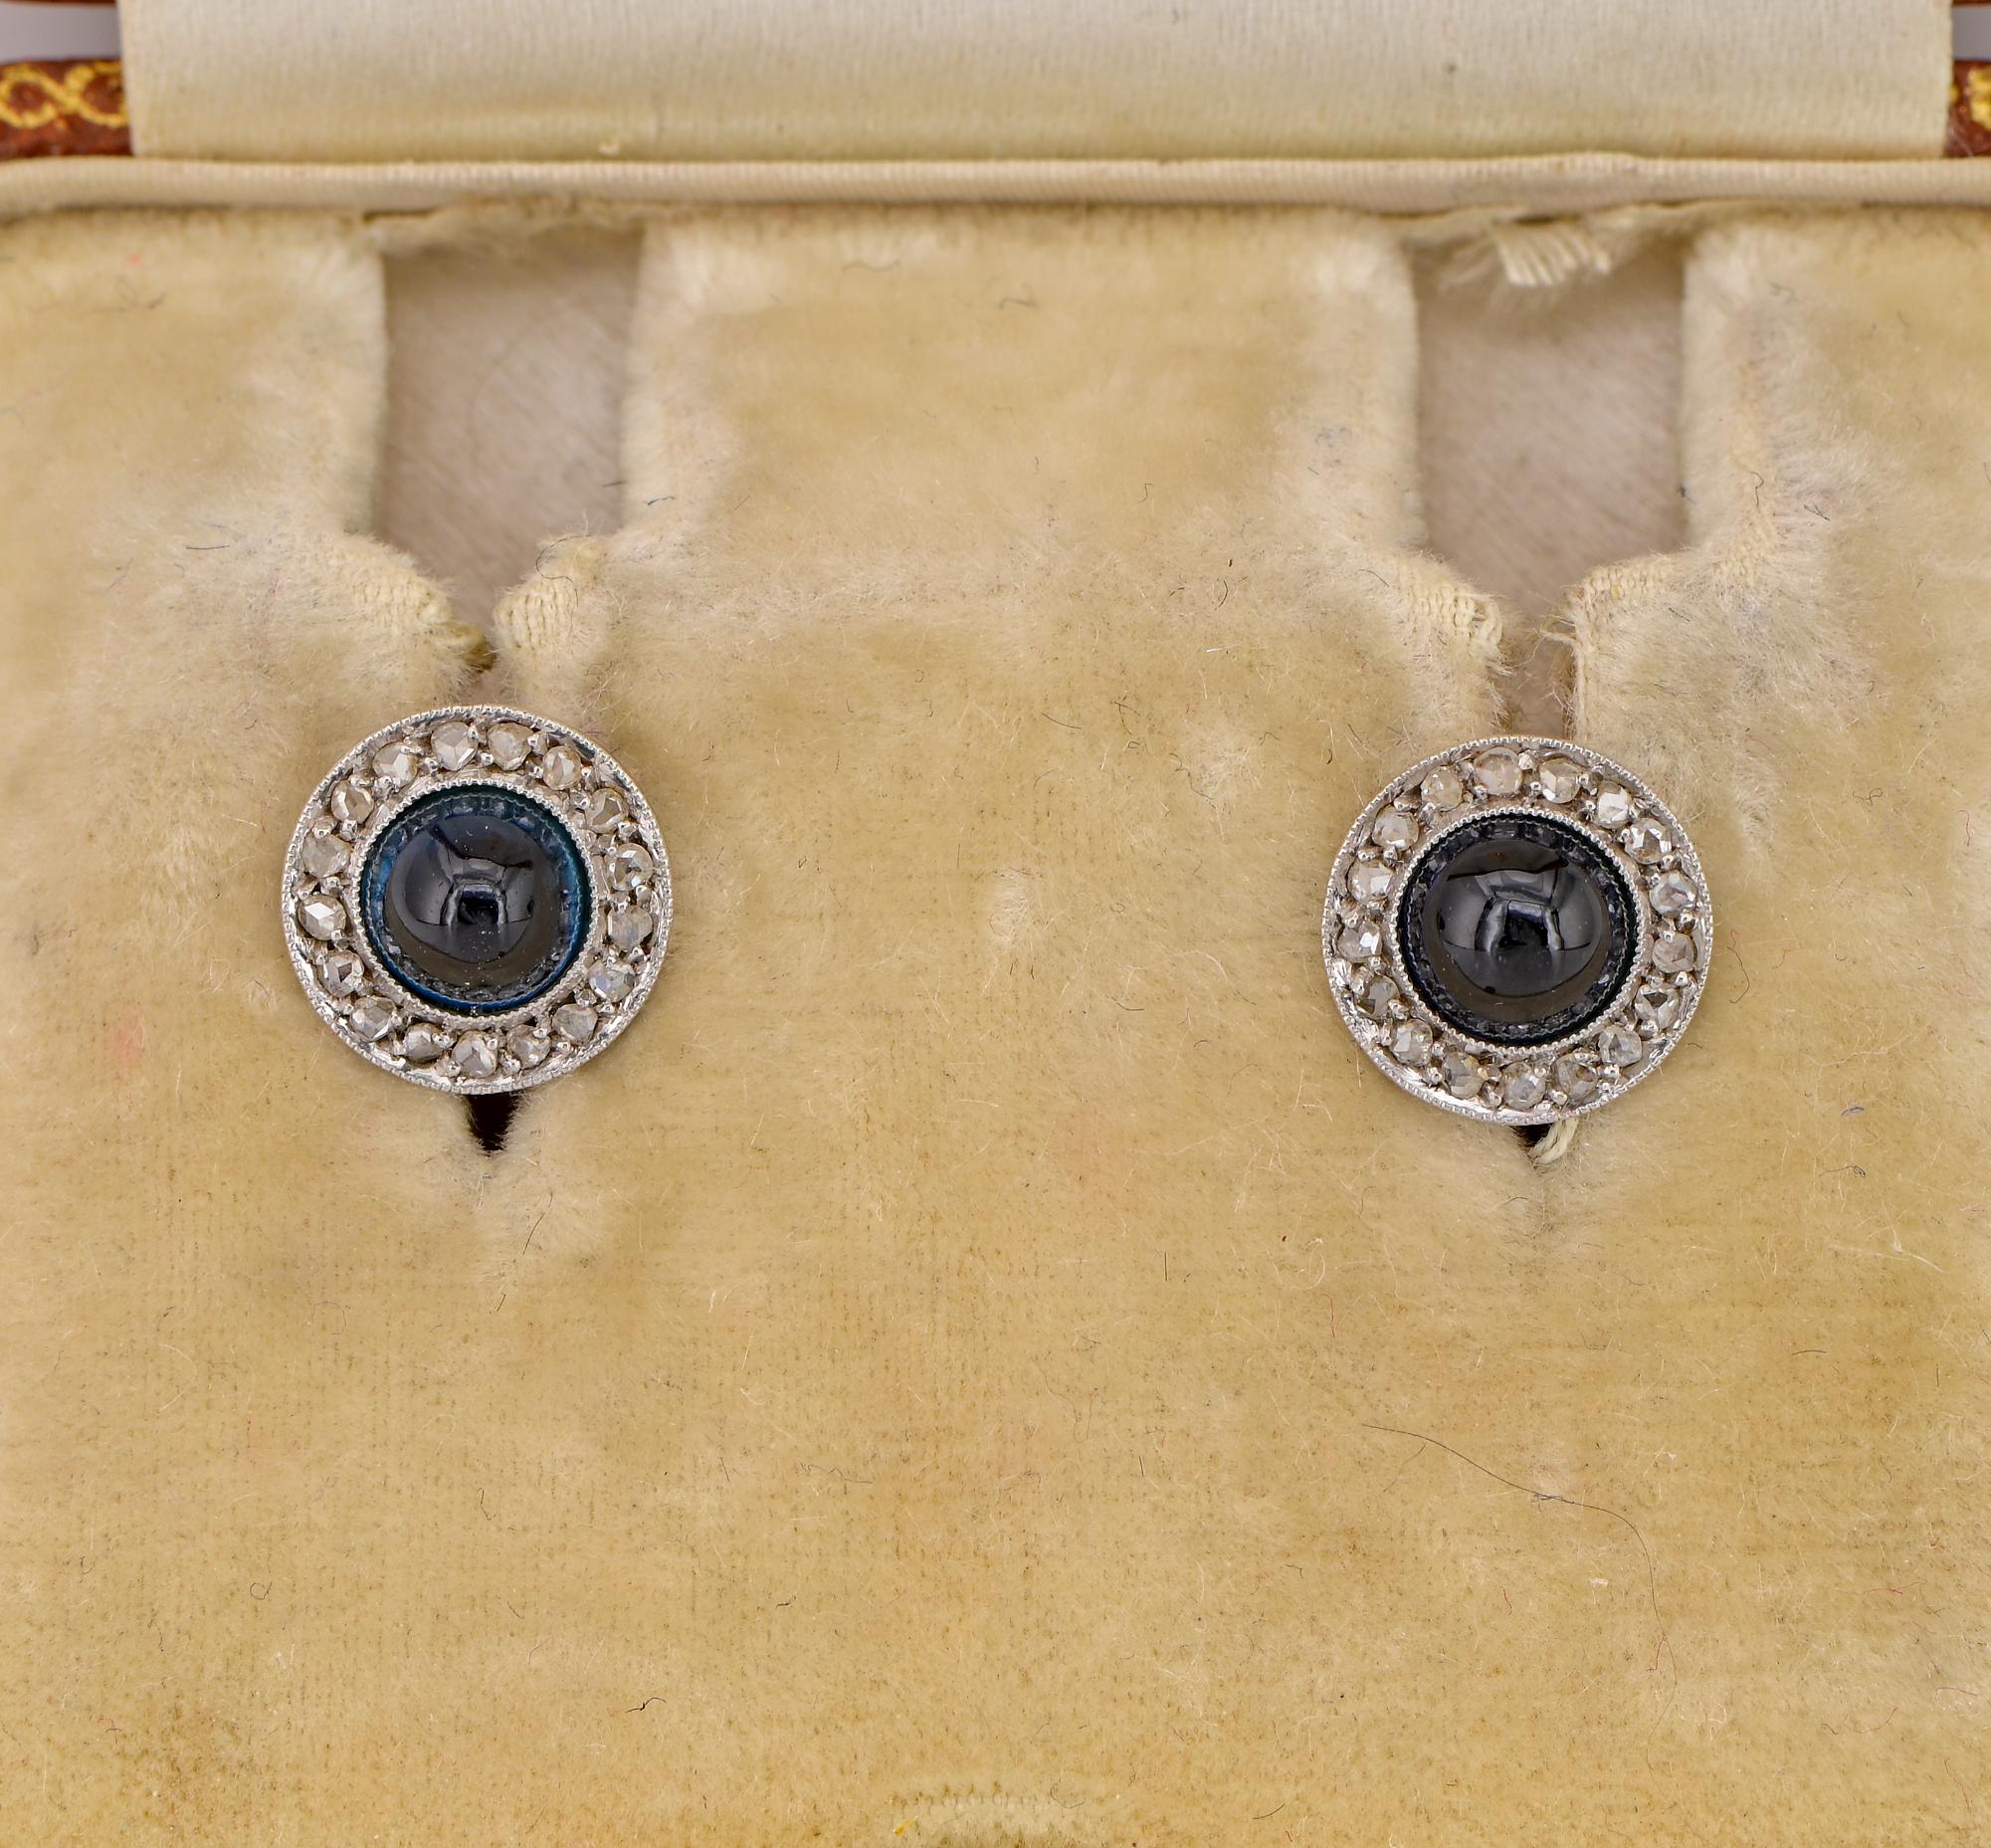 Rare Find
These sweet and unique Edwardian stud earrings are 1900/09 ca. – hand crafted of solid Platinum and 18 KT gold
Petit, Target design of infinite charm, made by two natural 100% untreated/ unheated natural Sapphires – approx 1.95 Ct. (